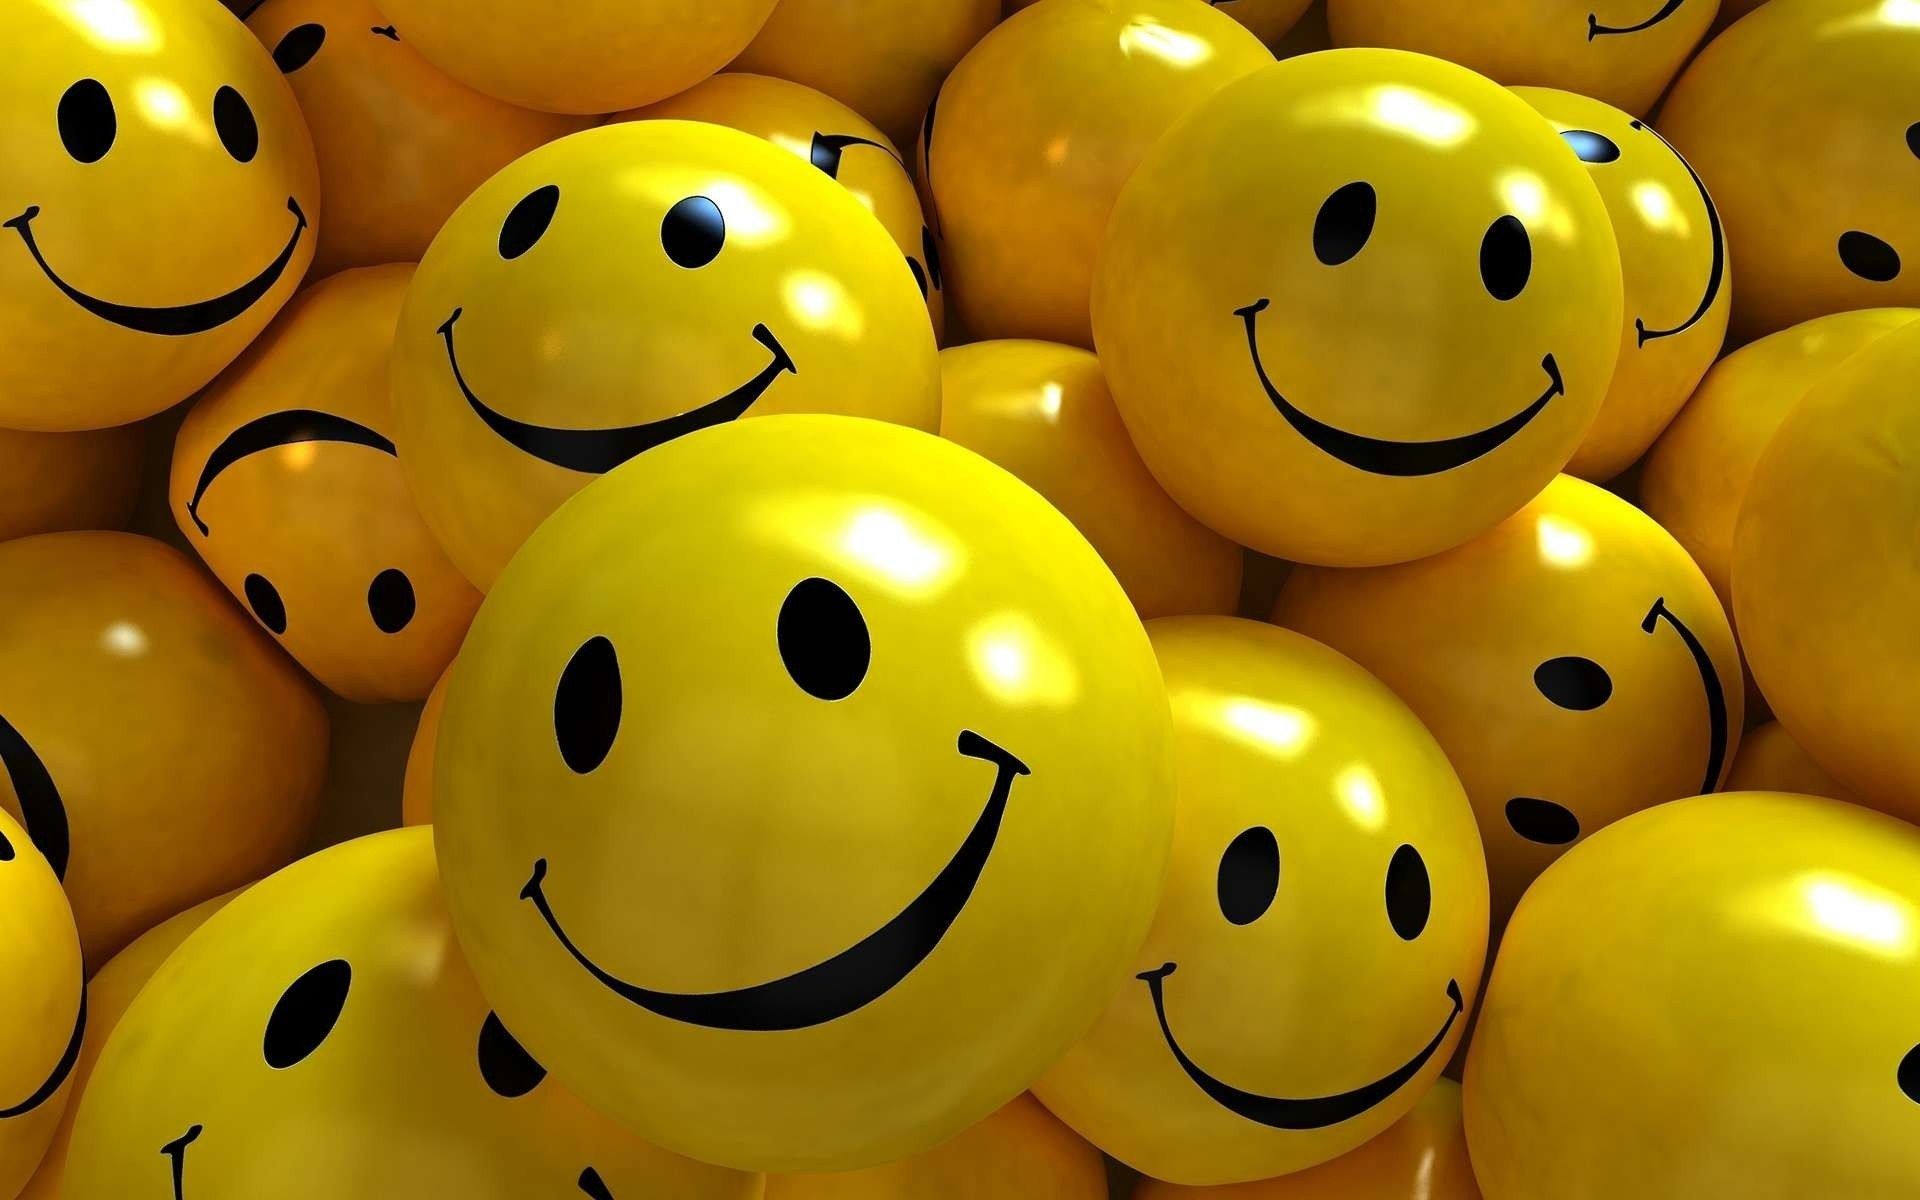 Download wallpapers Smiling face neon icon 4k yellow background smiley  icons Smiling face Emotion neon symbols Smiling face neon icons  Smiling face sign emotion signs Smiling face icon emotion icons for  desktop